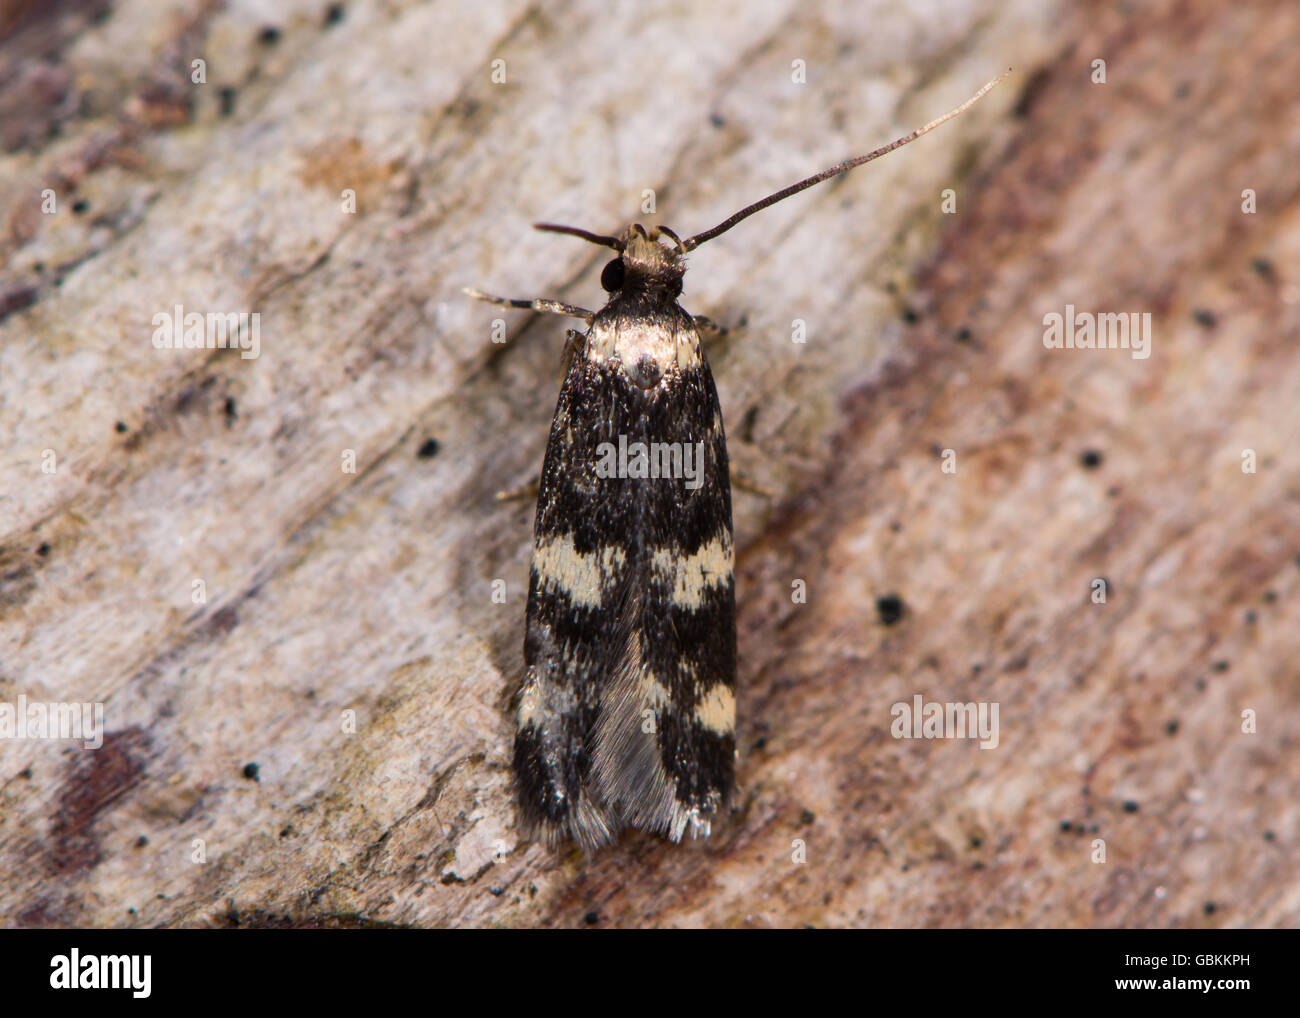 Oegoconia quadripuncta micro moth. Small insect in the family Autostichidae seen from above, with long labial palps visible Stock Photo